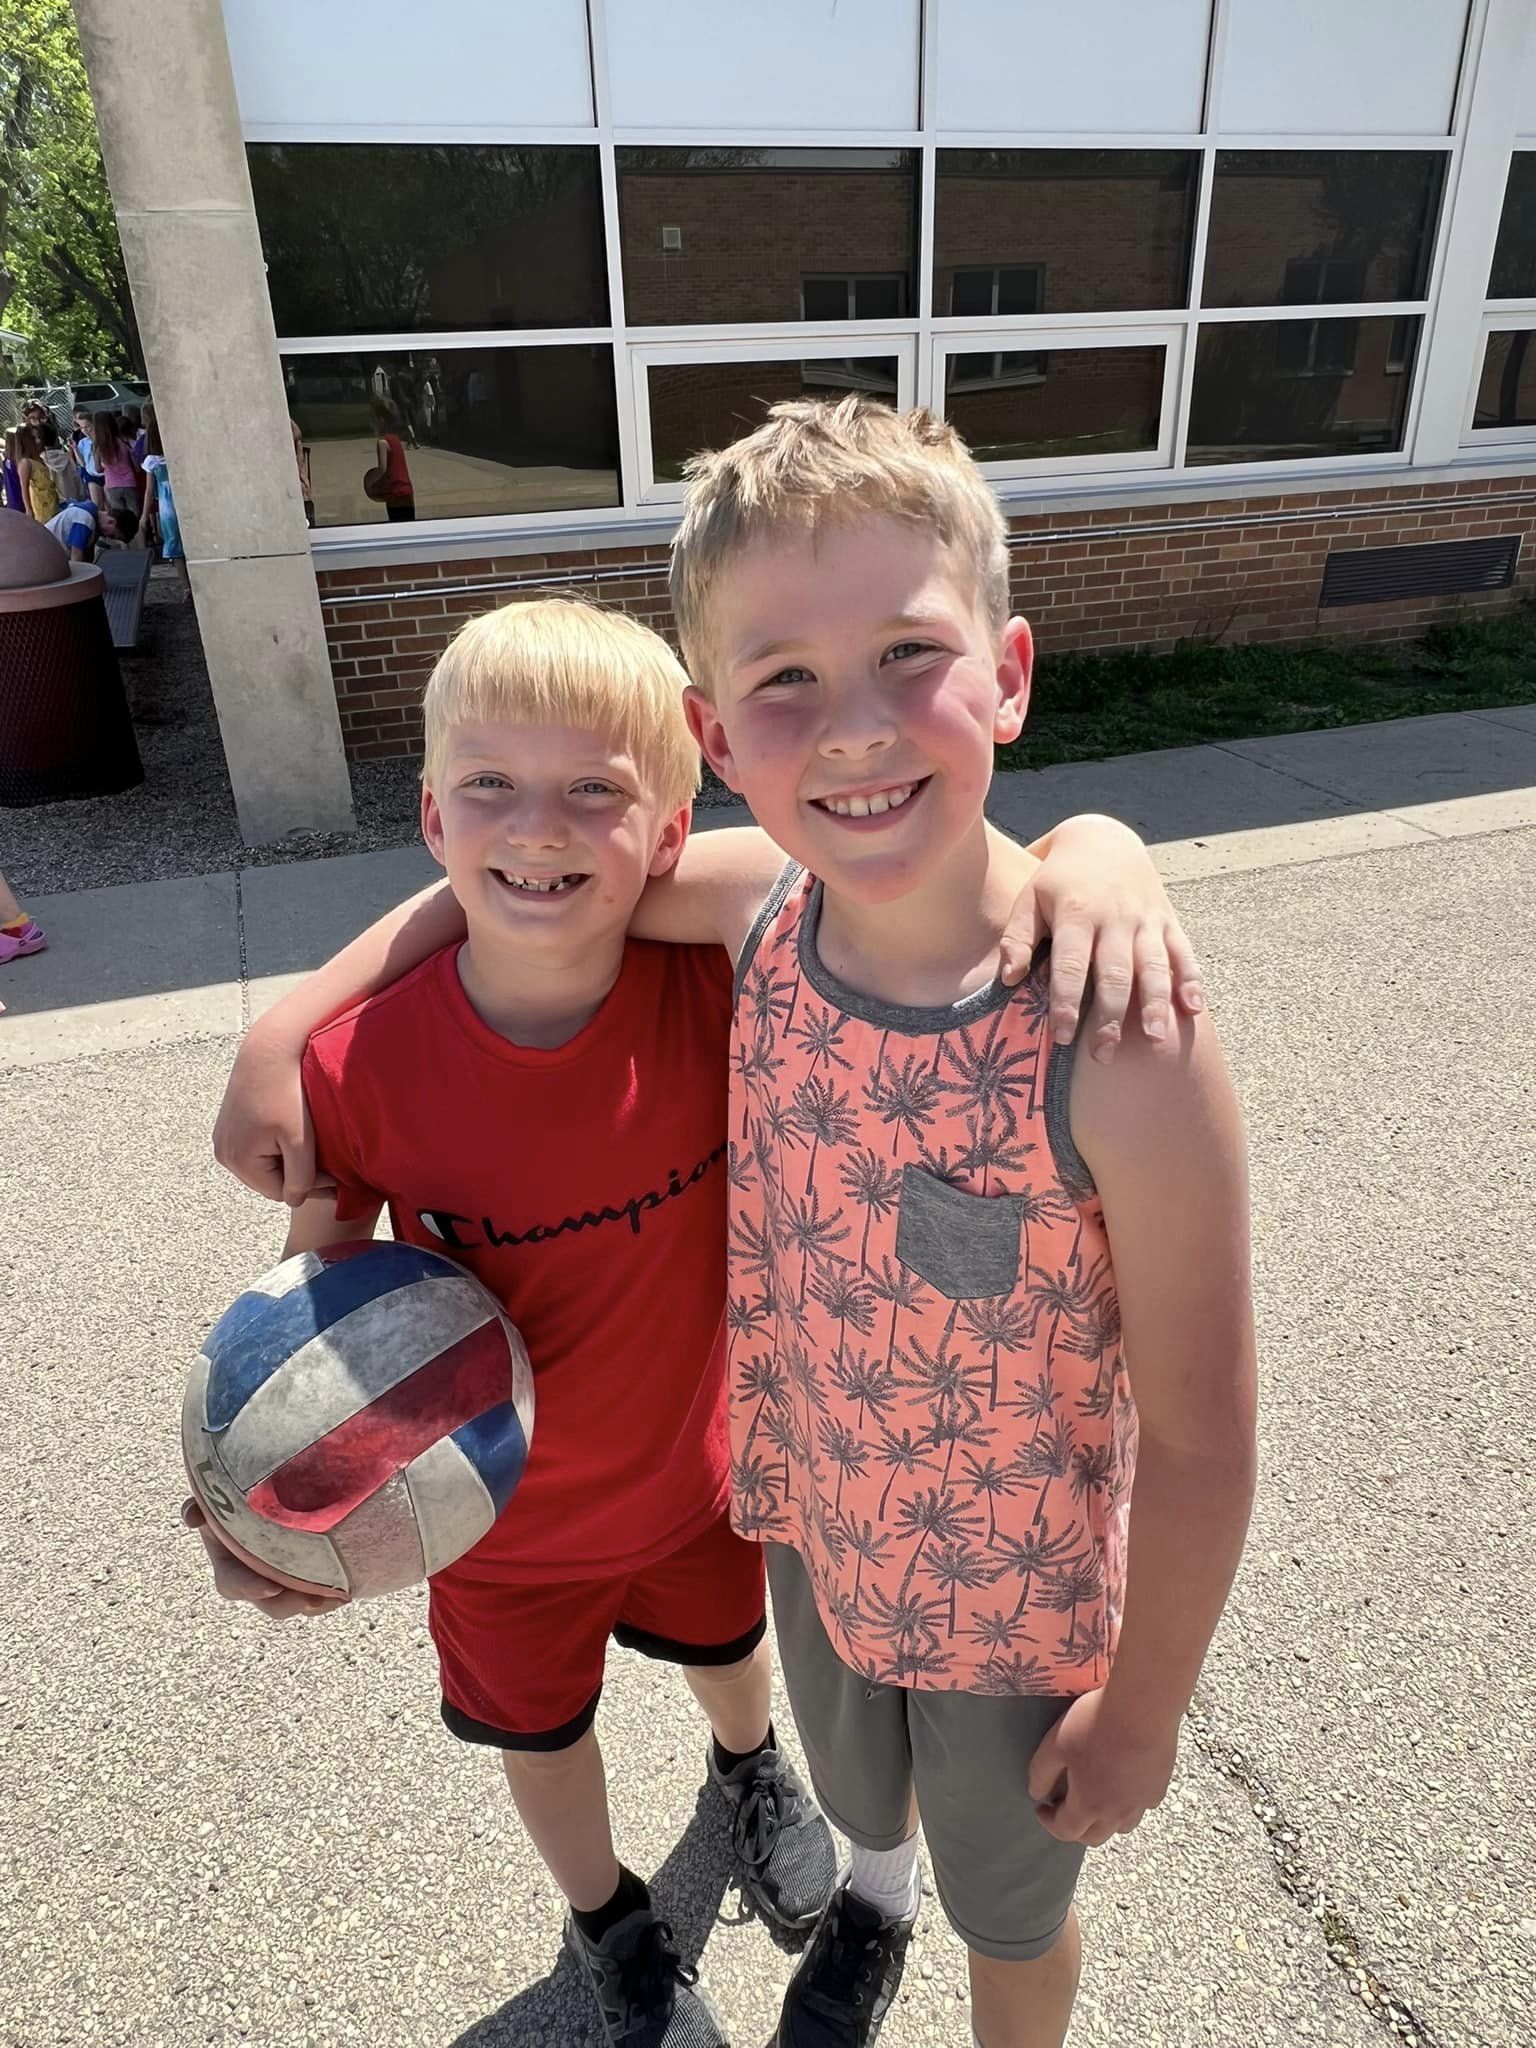 Two boys smiling at recess, one holding ball